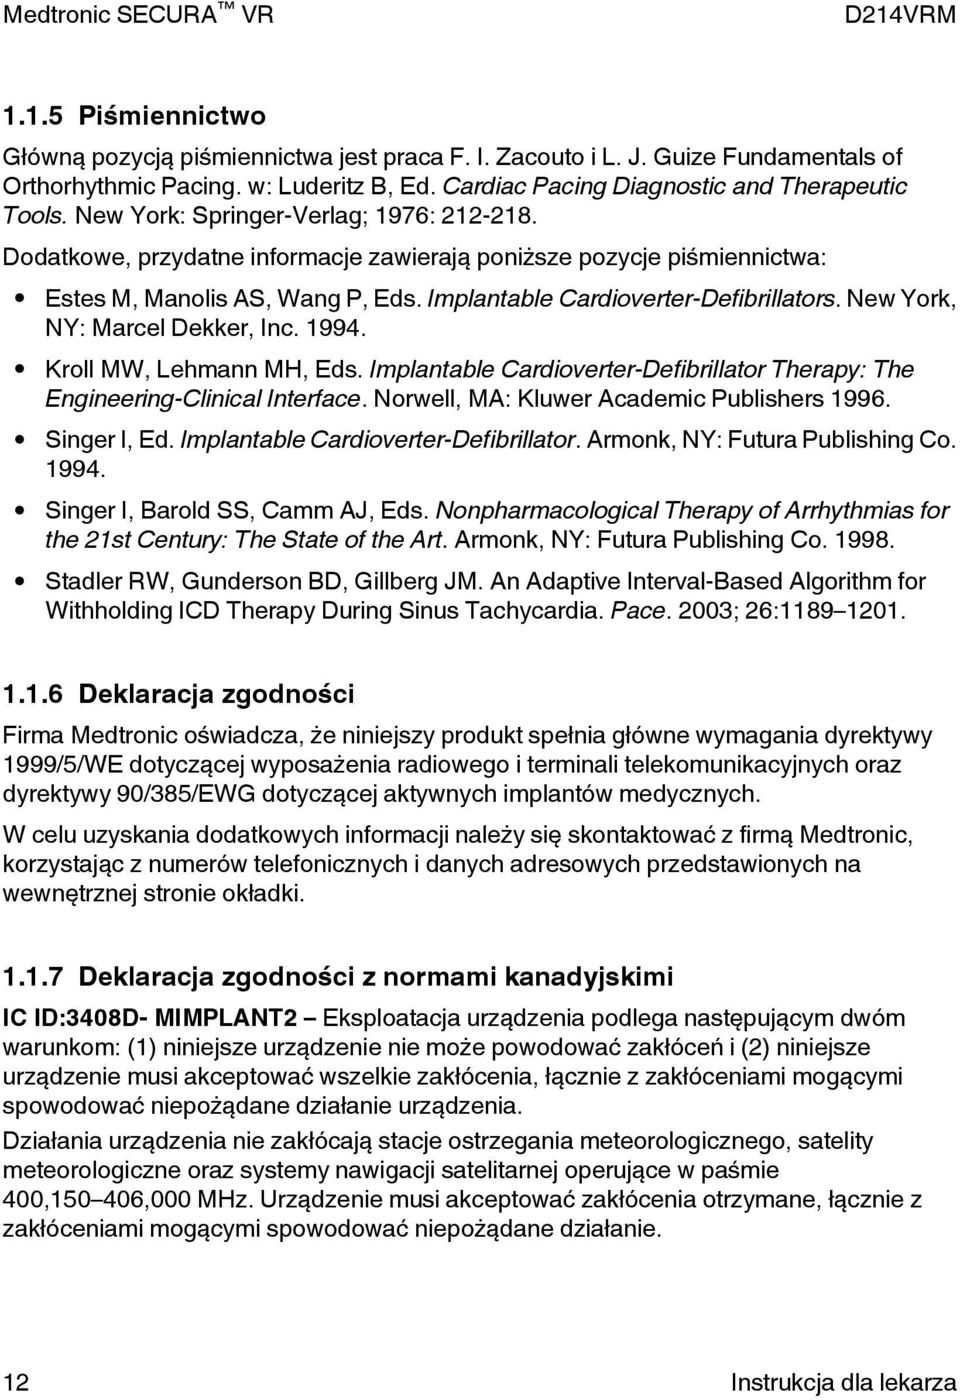 New York, NY: Marcel Dekker, Inc. 1994. Kroll MW, Lehmann MH, Eds. Implantable Cardioverter-Defibrillator Therapy: The Engineering-Clinical Interface. Norwell, MA: Kluwer Academic Publishers 1996.